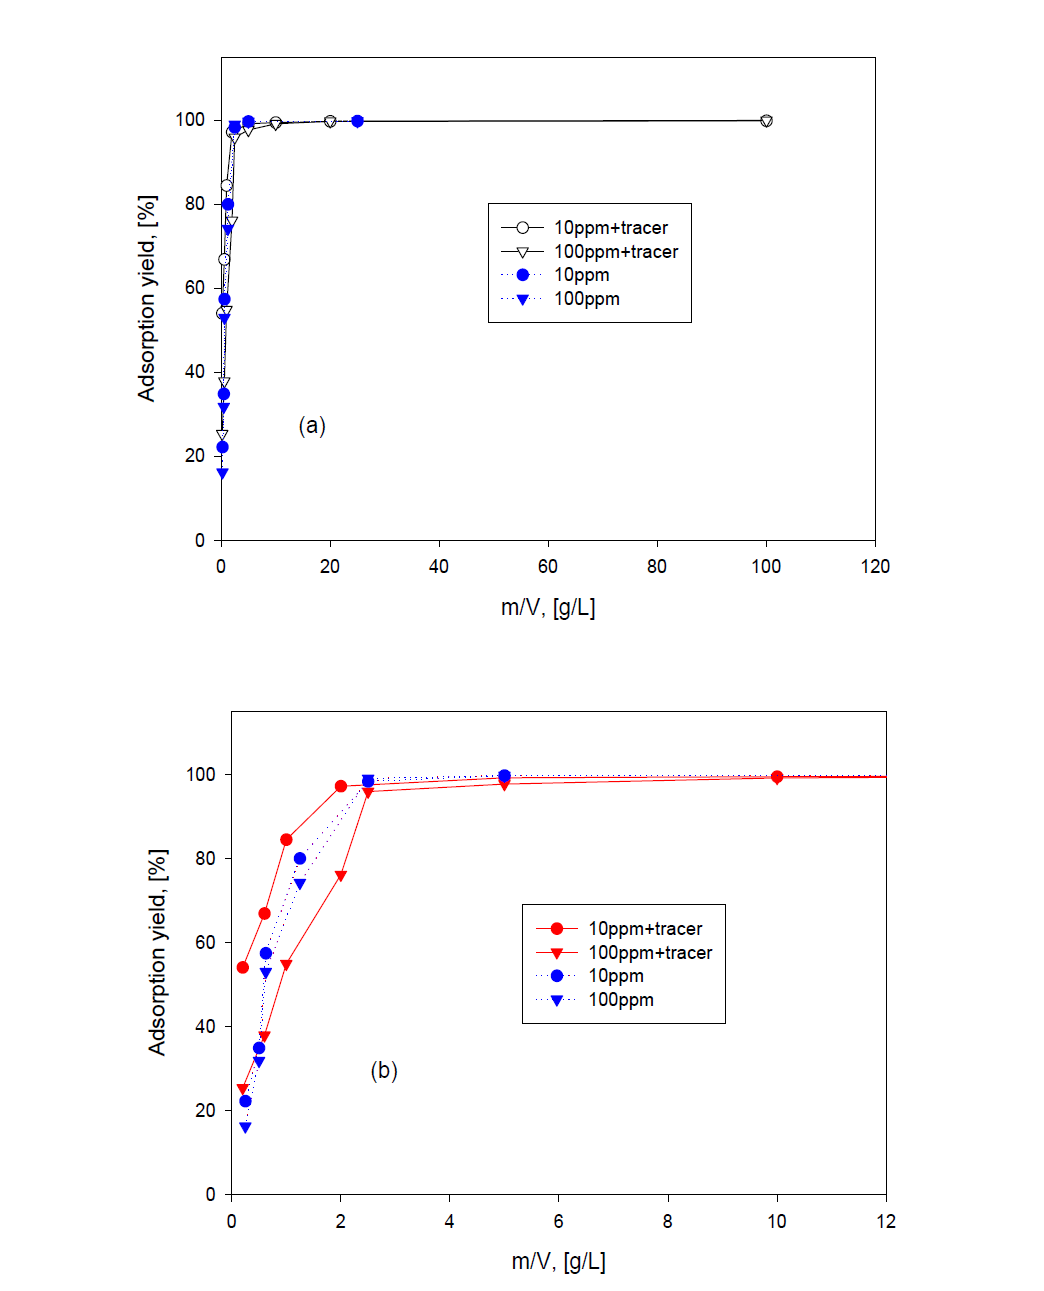 Comparison of adsorption yield of Cs by IE911 silicotitanate obtained from radioactive isotope experiment and non-radioactive experiment.